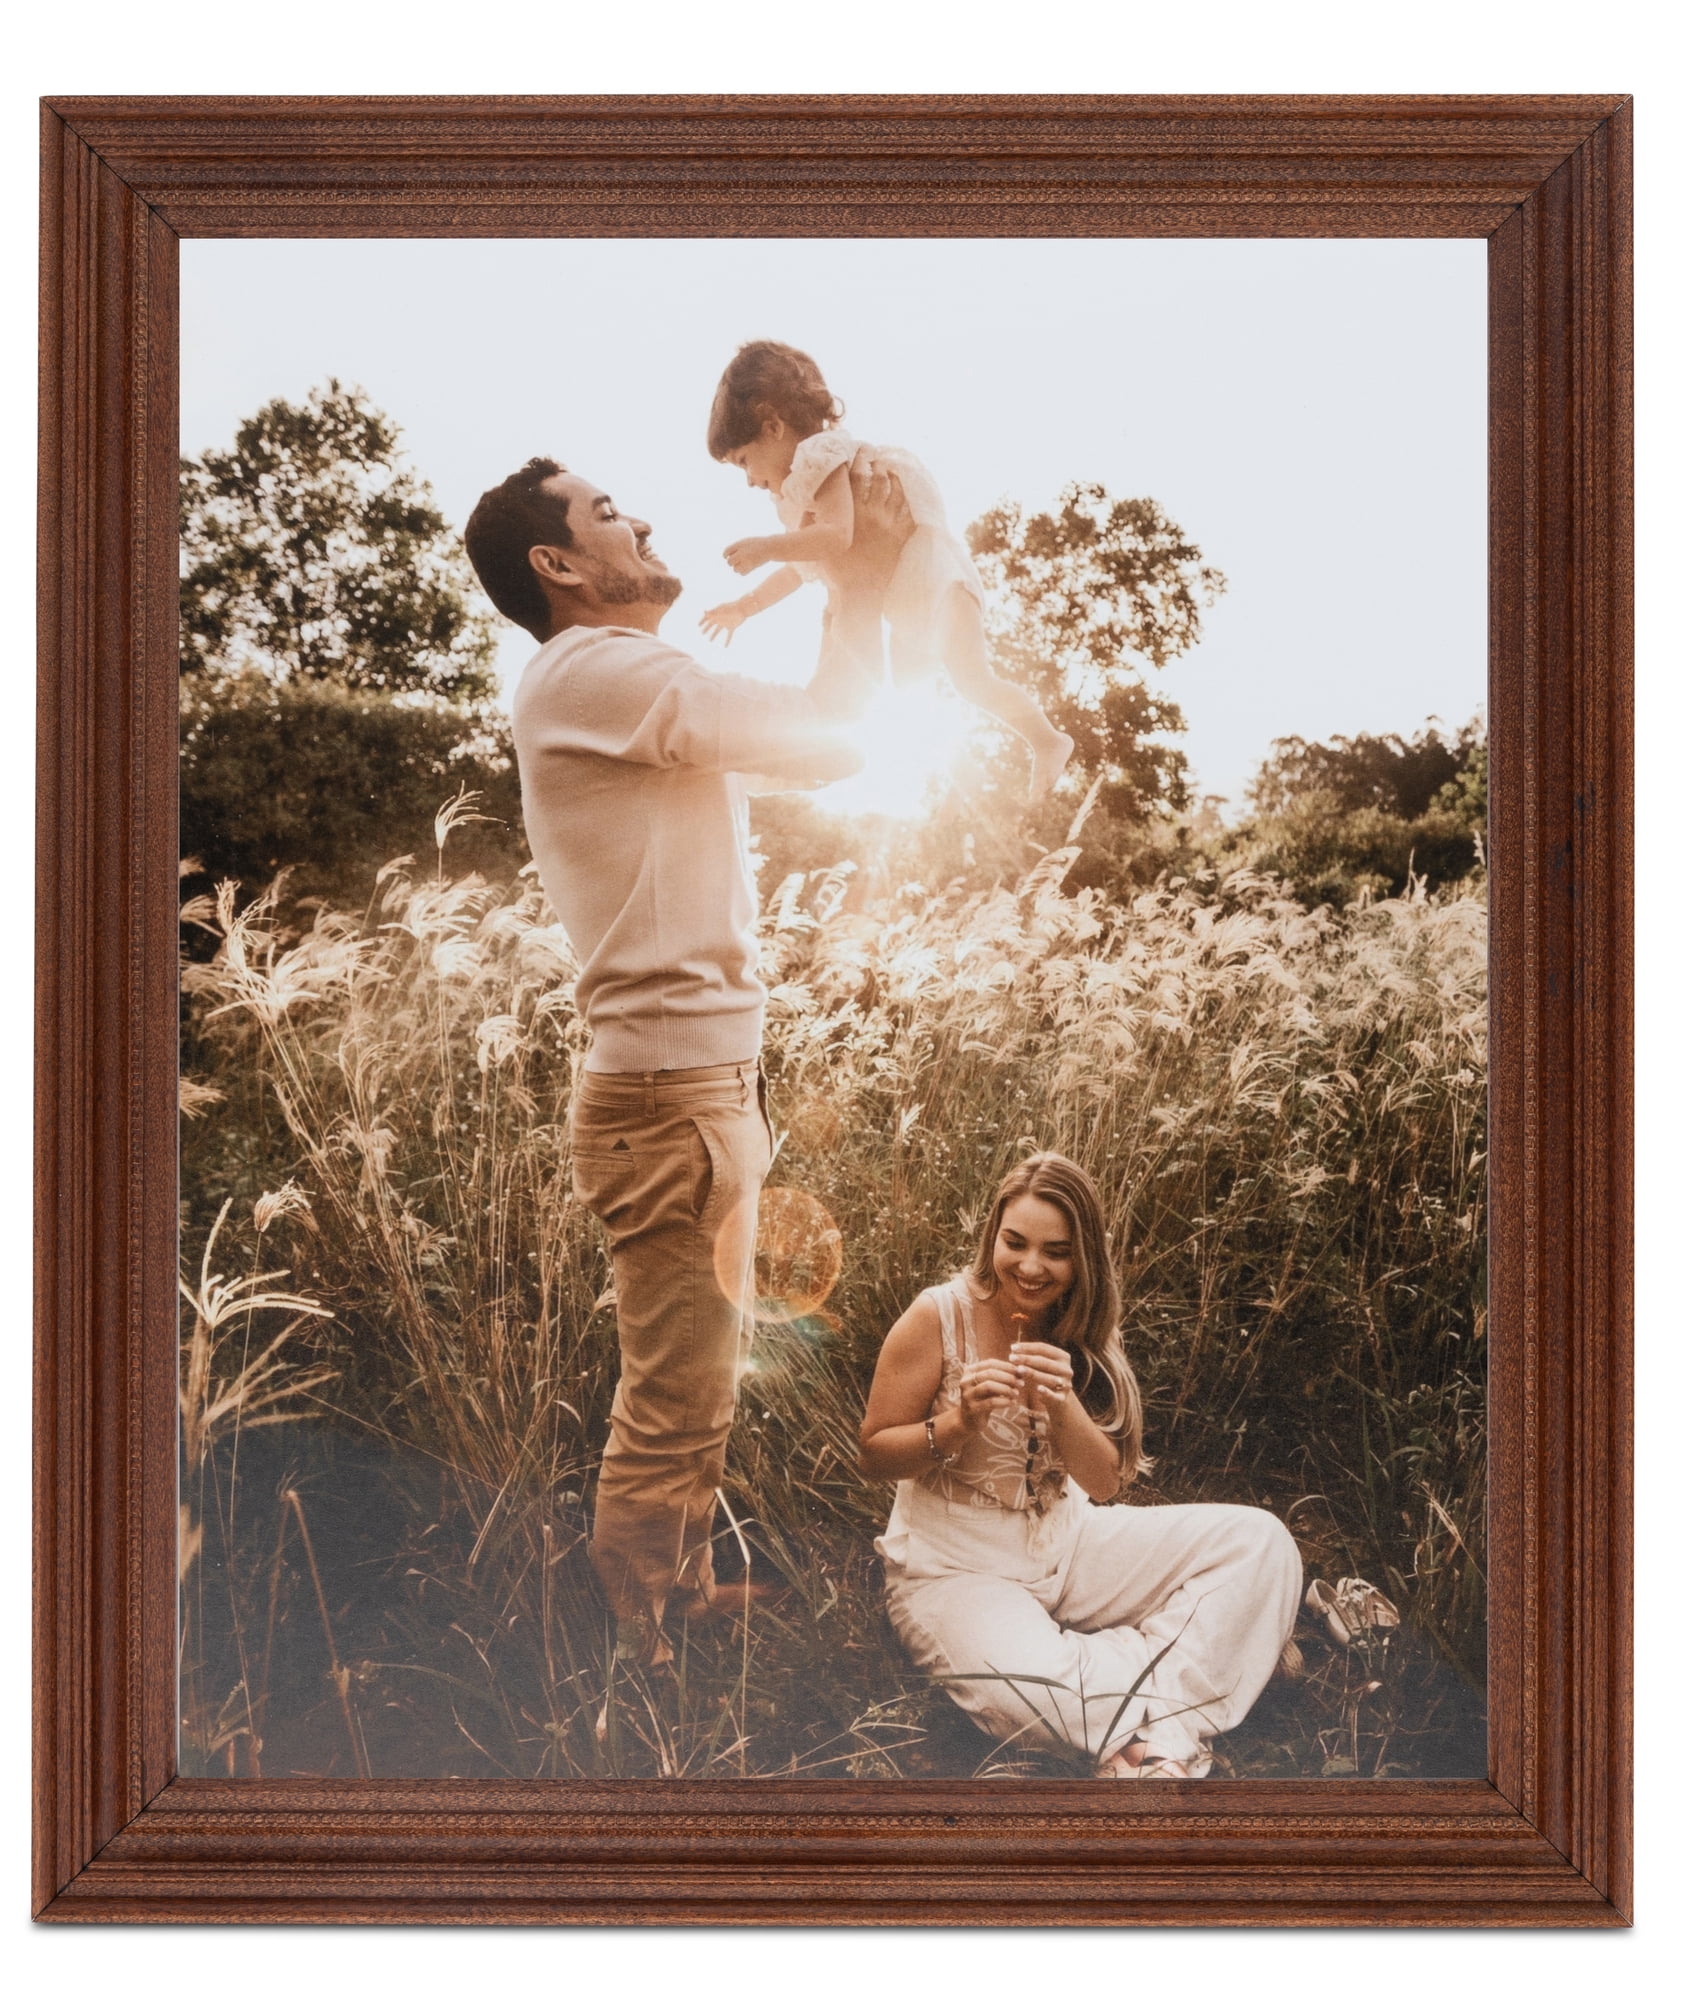  ArtToFrames 4x10 inch Gold Wood Picture Frame, 2WOM80801-GLD- 4x10, 4 x 10